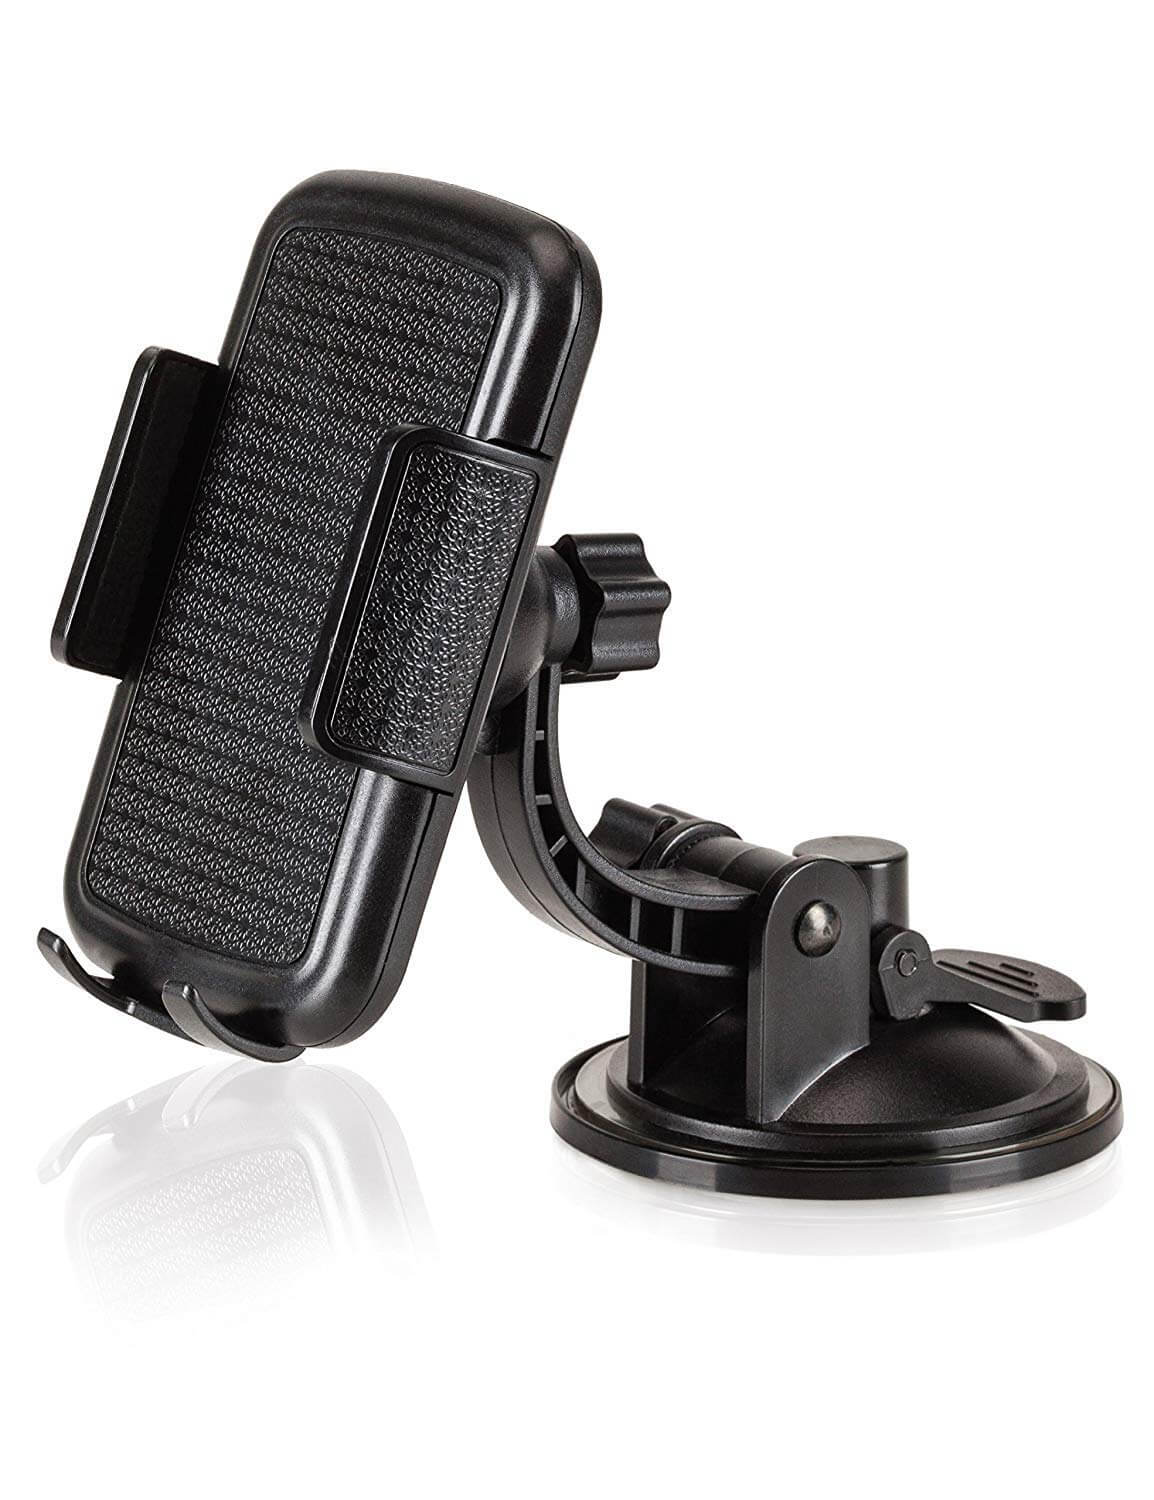 Bestrix Universal Dashboard & Windshield Car Phone Mount Holder Compatible with iPhone 6/6S/7/8/X Plus 5S/5C/5 Samsung Galaxy S5/S6/S7/S8/S9 Edge/Plus Note 4/5/8 LG G4/G5/G6 All Smartphones up to 6" - Bestrix